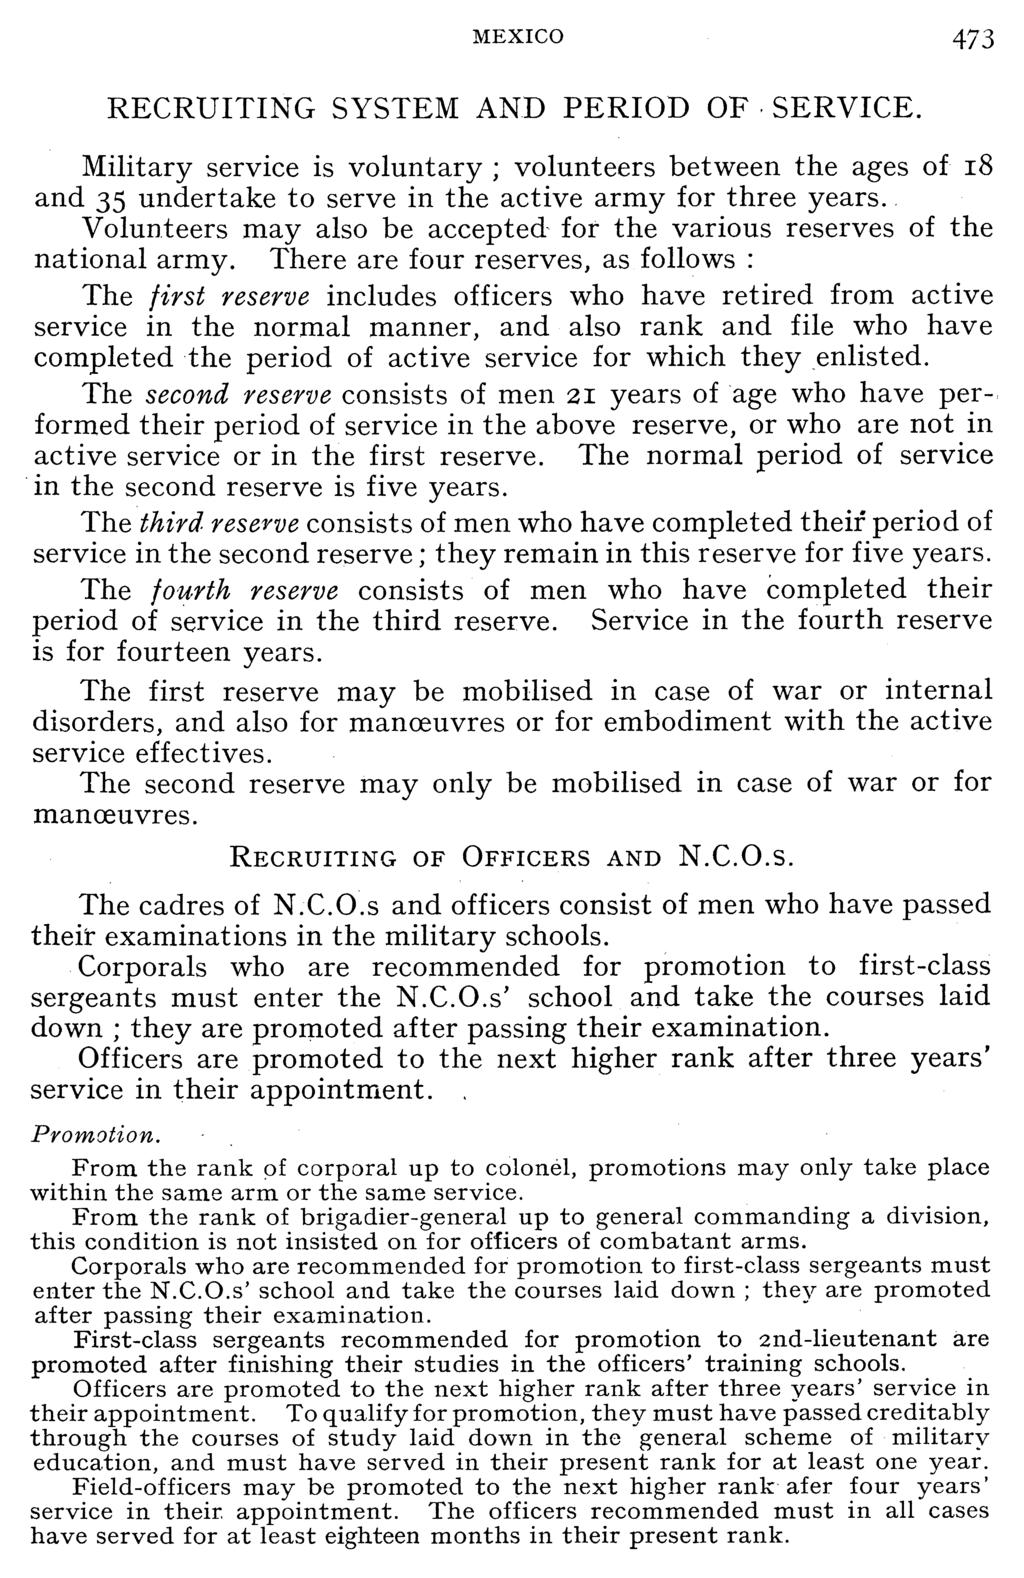 MEXICO 473 RECRUITING SYSTEM AND PERIOD OF, SERVICE. Military service is voluntary; volunteers between the ages of 18 and 35 undertake to serve in the active army for three years.